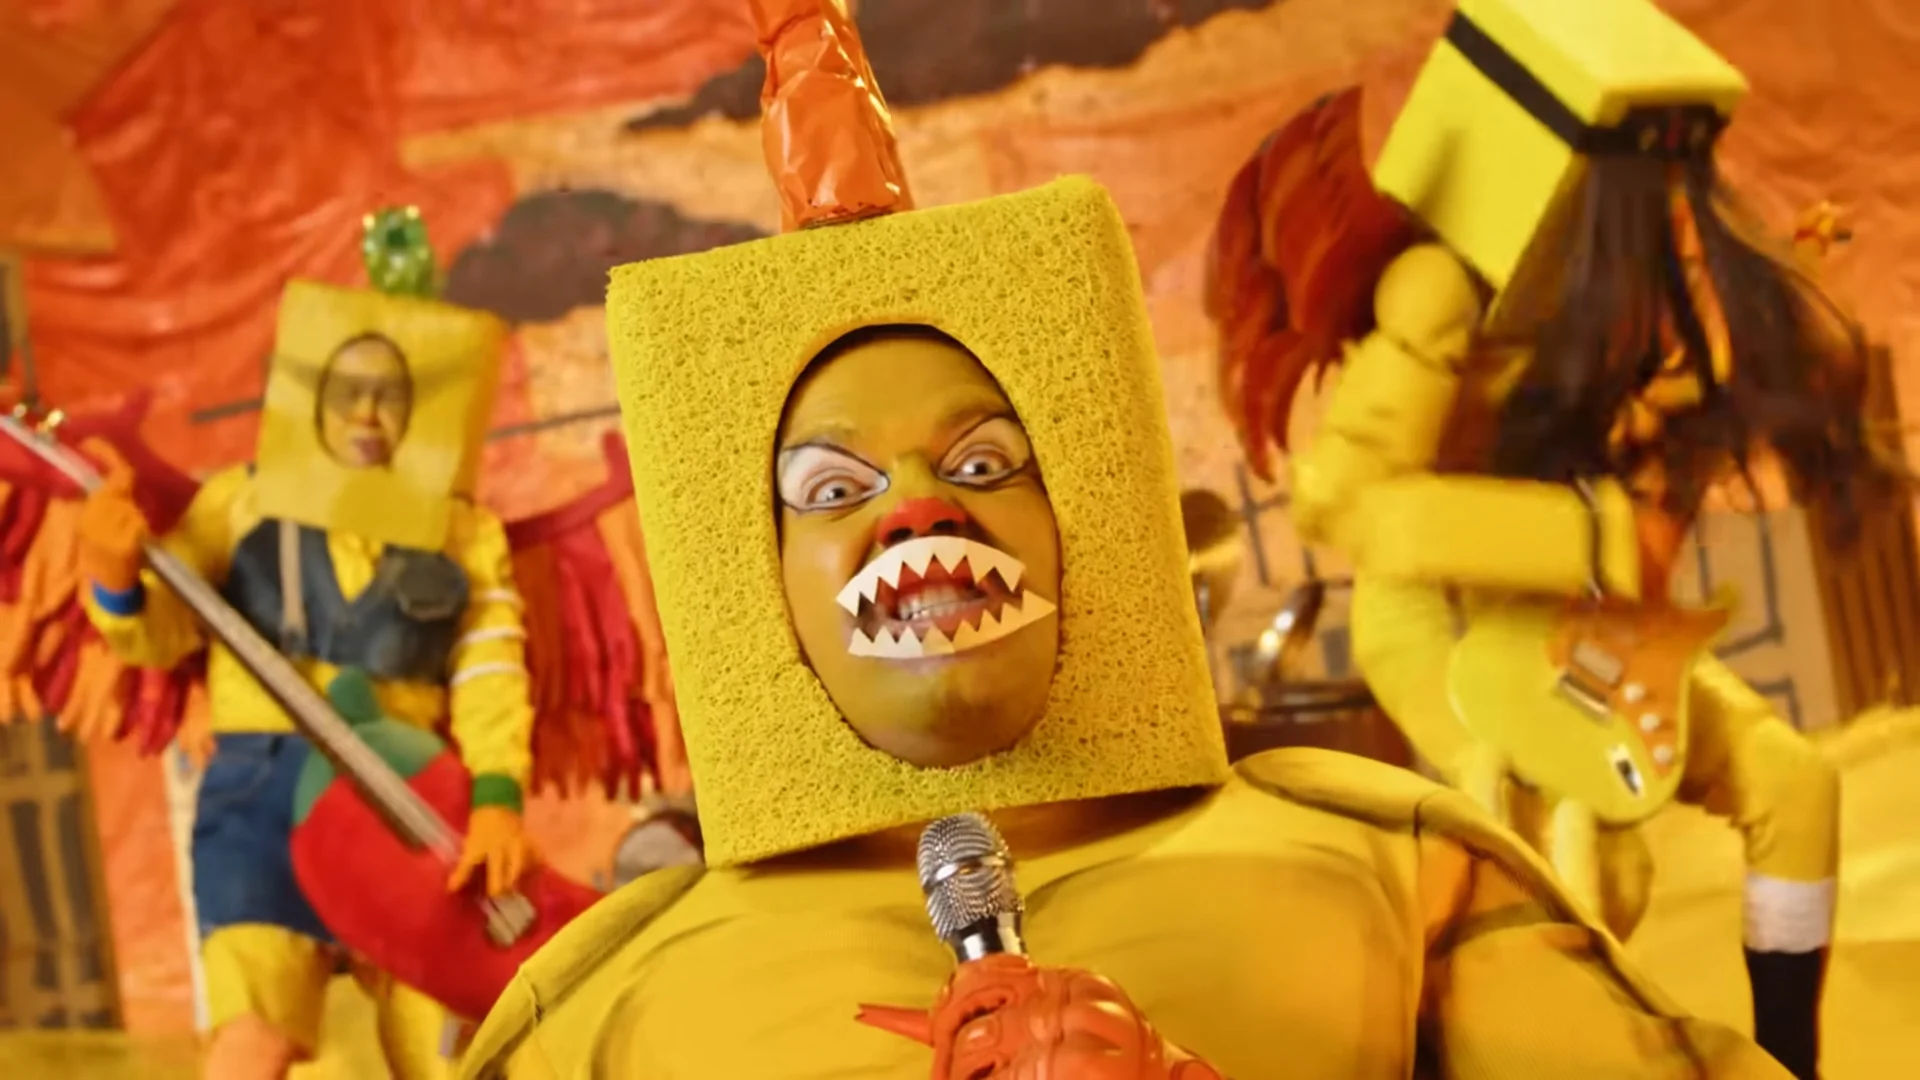 Person in sponge costume performing with microphone on stage with band members in quirky outfits.